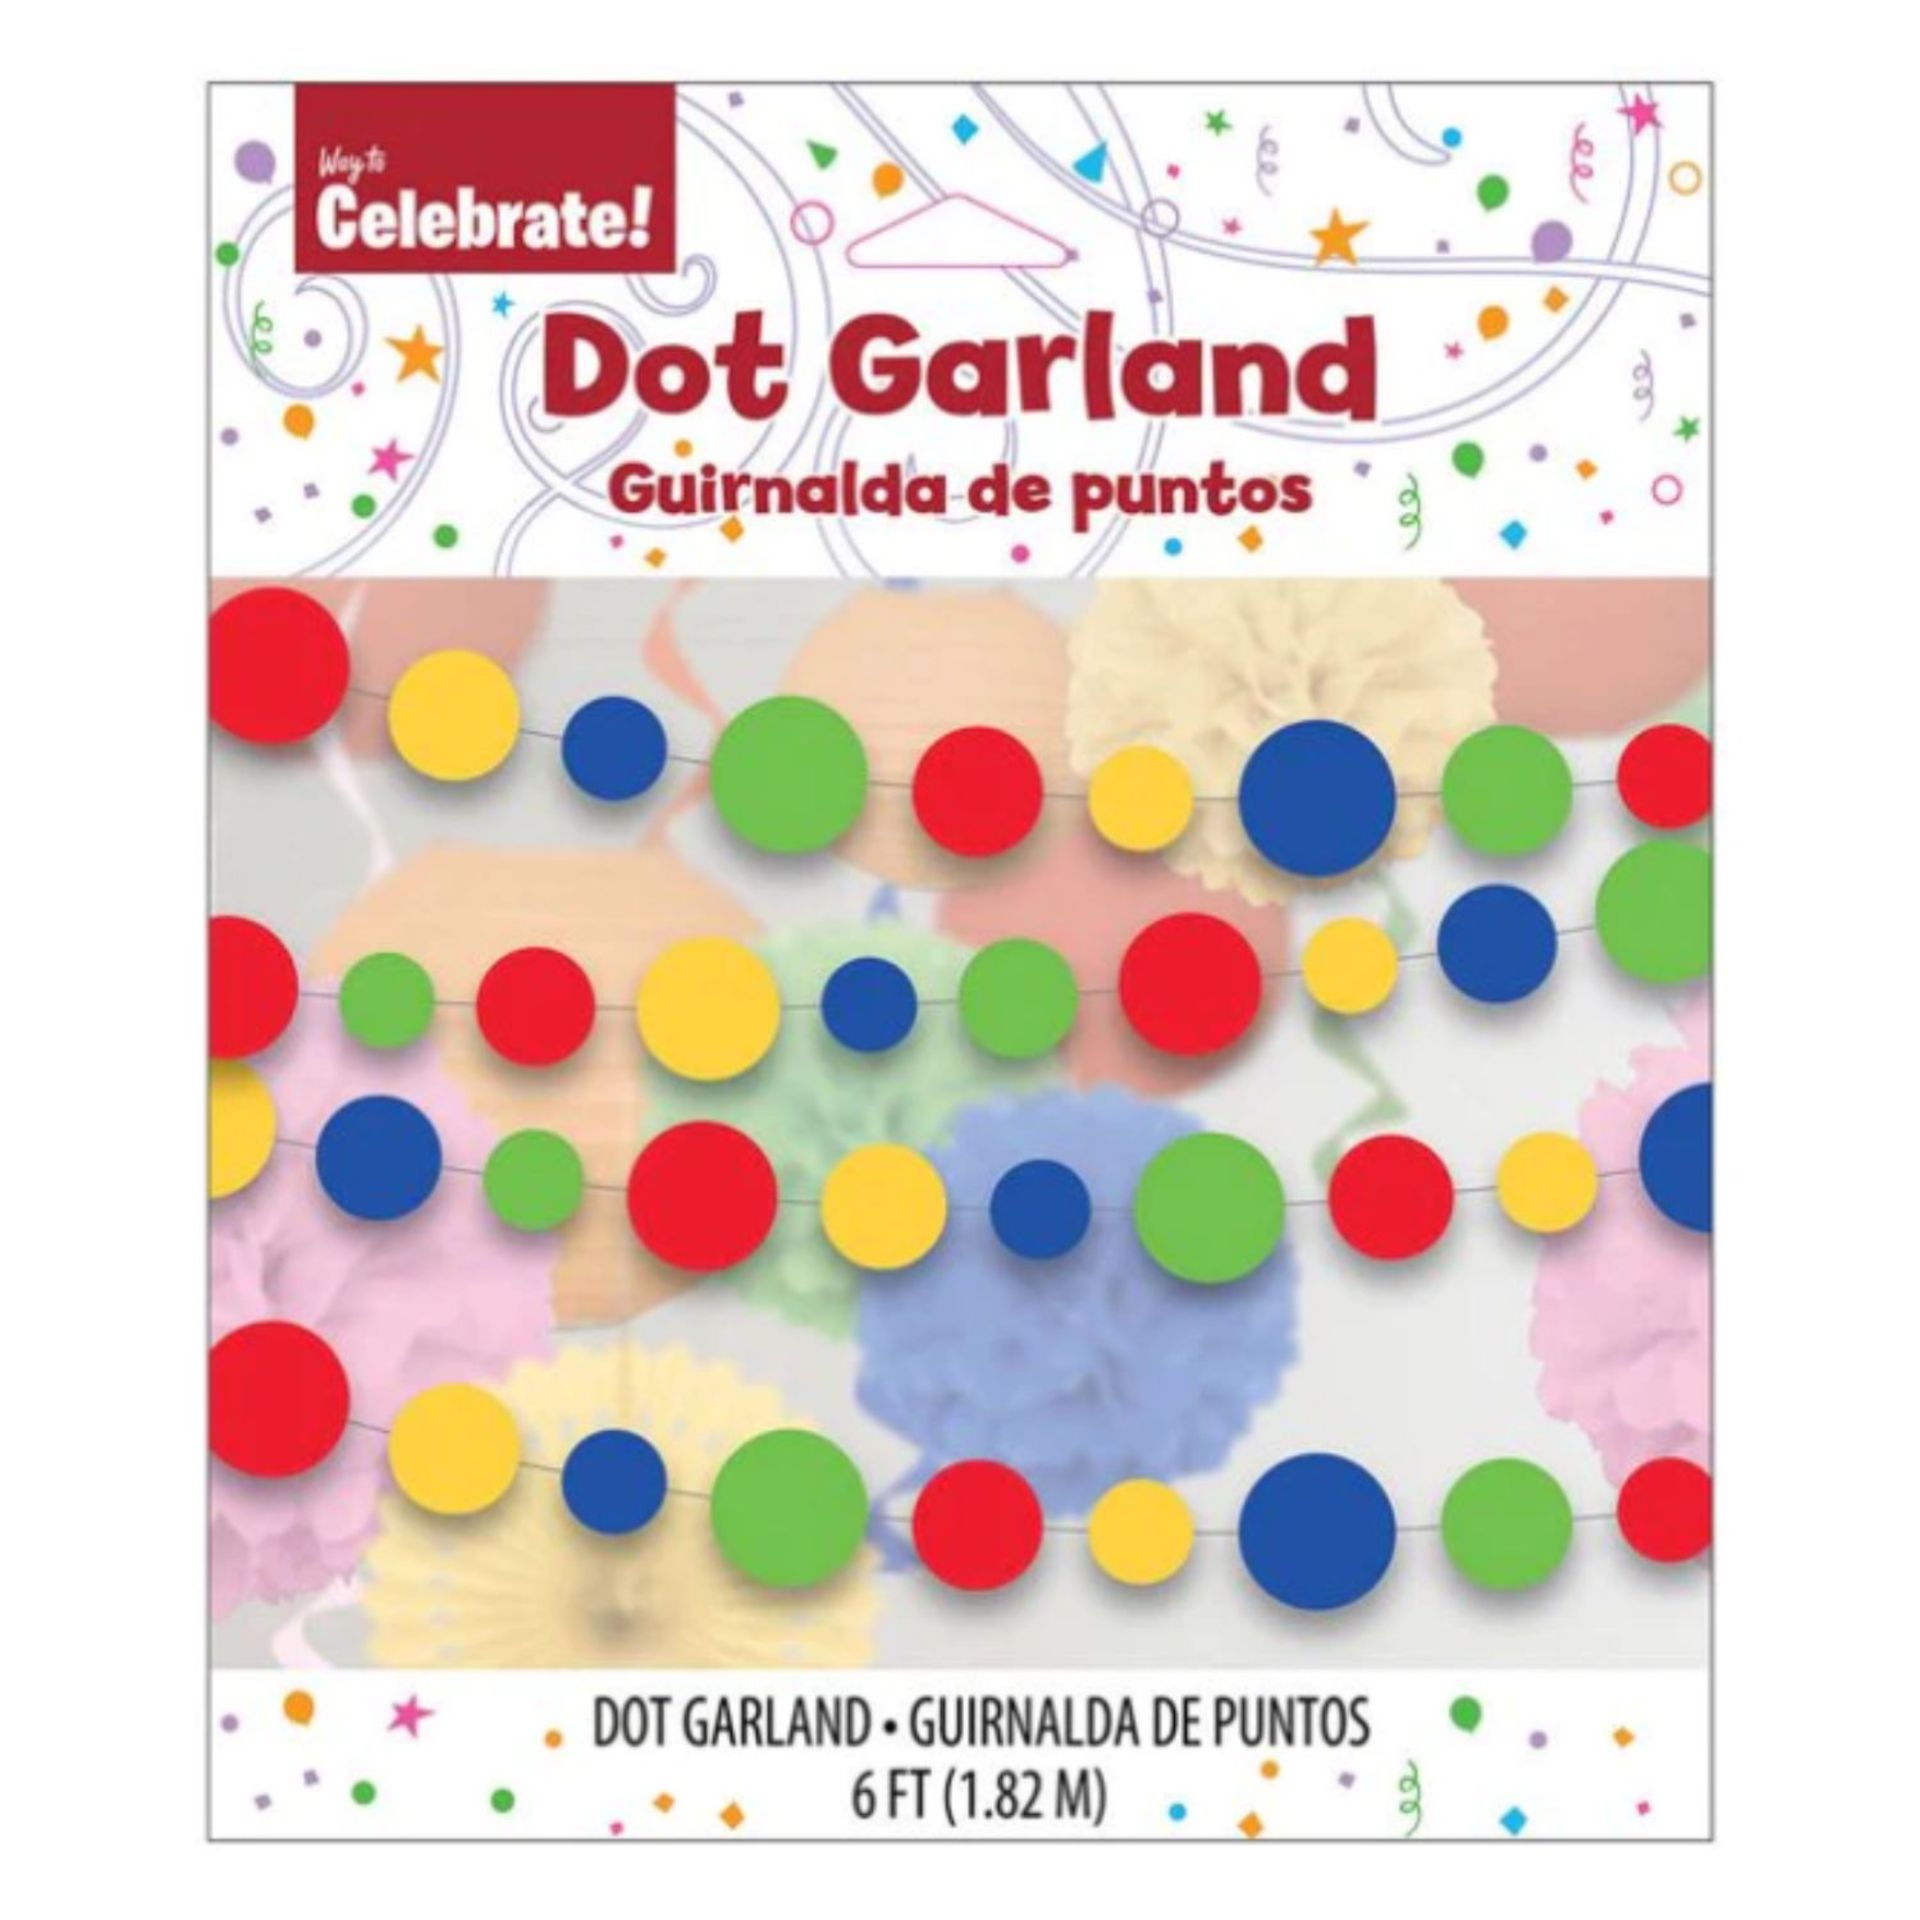 2500 PARTY SUPPLIES BOLD DOTS PAPER GARLAND, 6FT, RED, GREEN, BLUE & YELLOW RRP £25,000